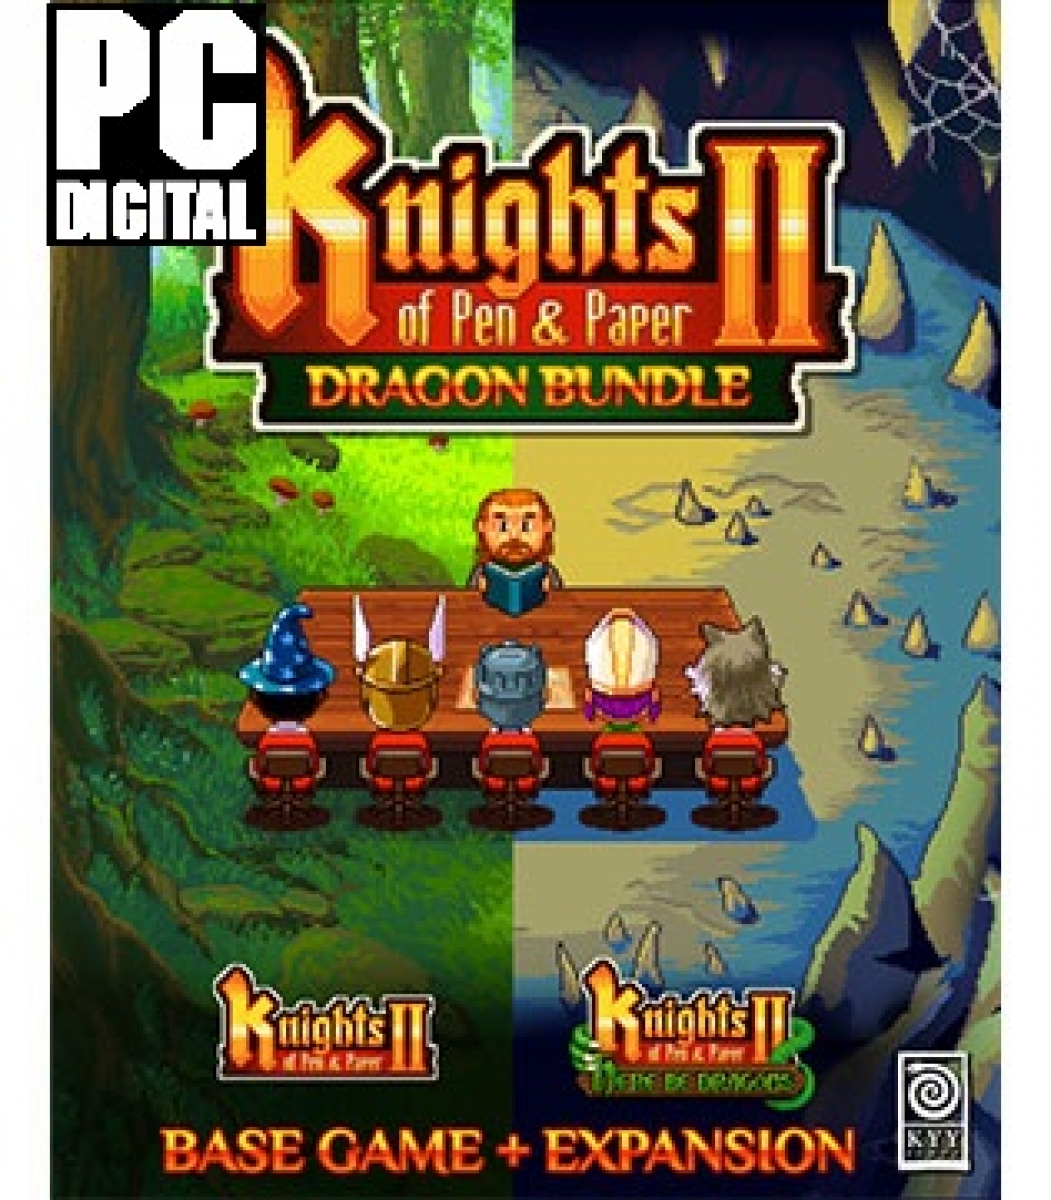 Knights Of Pen And Paper 2 – Dragon Bundle PC (Digital)